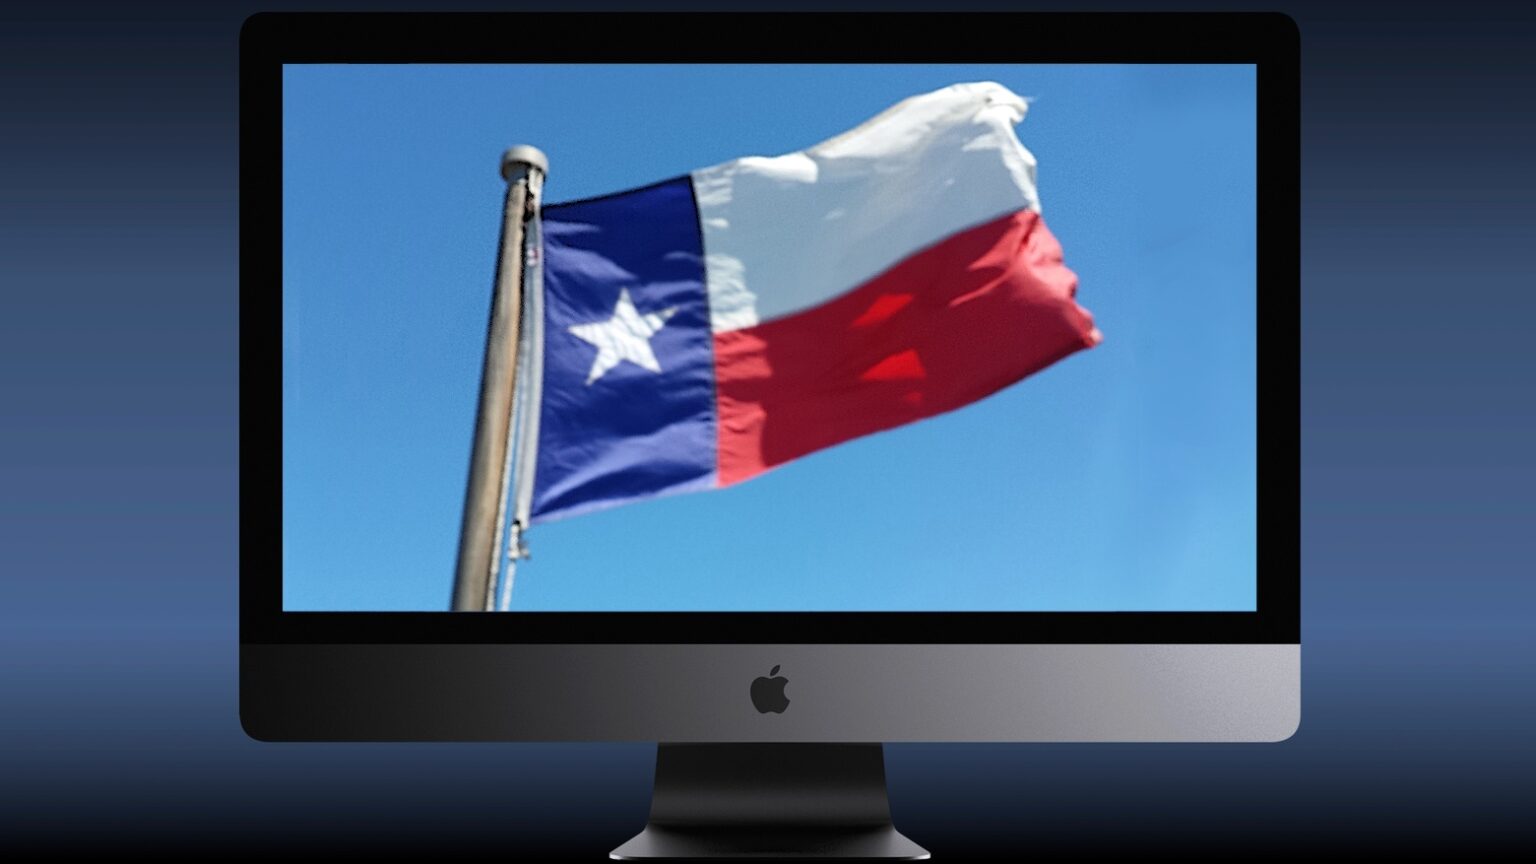 The Texas AG is checking whether Apple did any deceptive trade practices